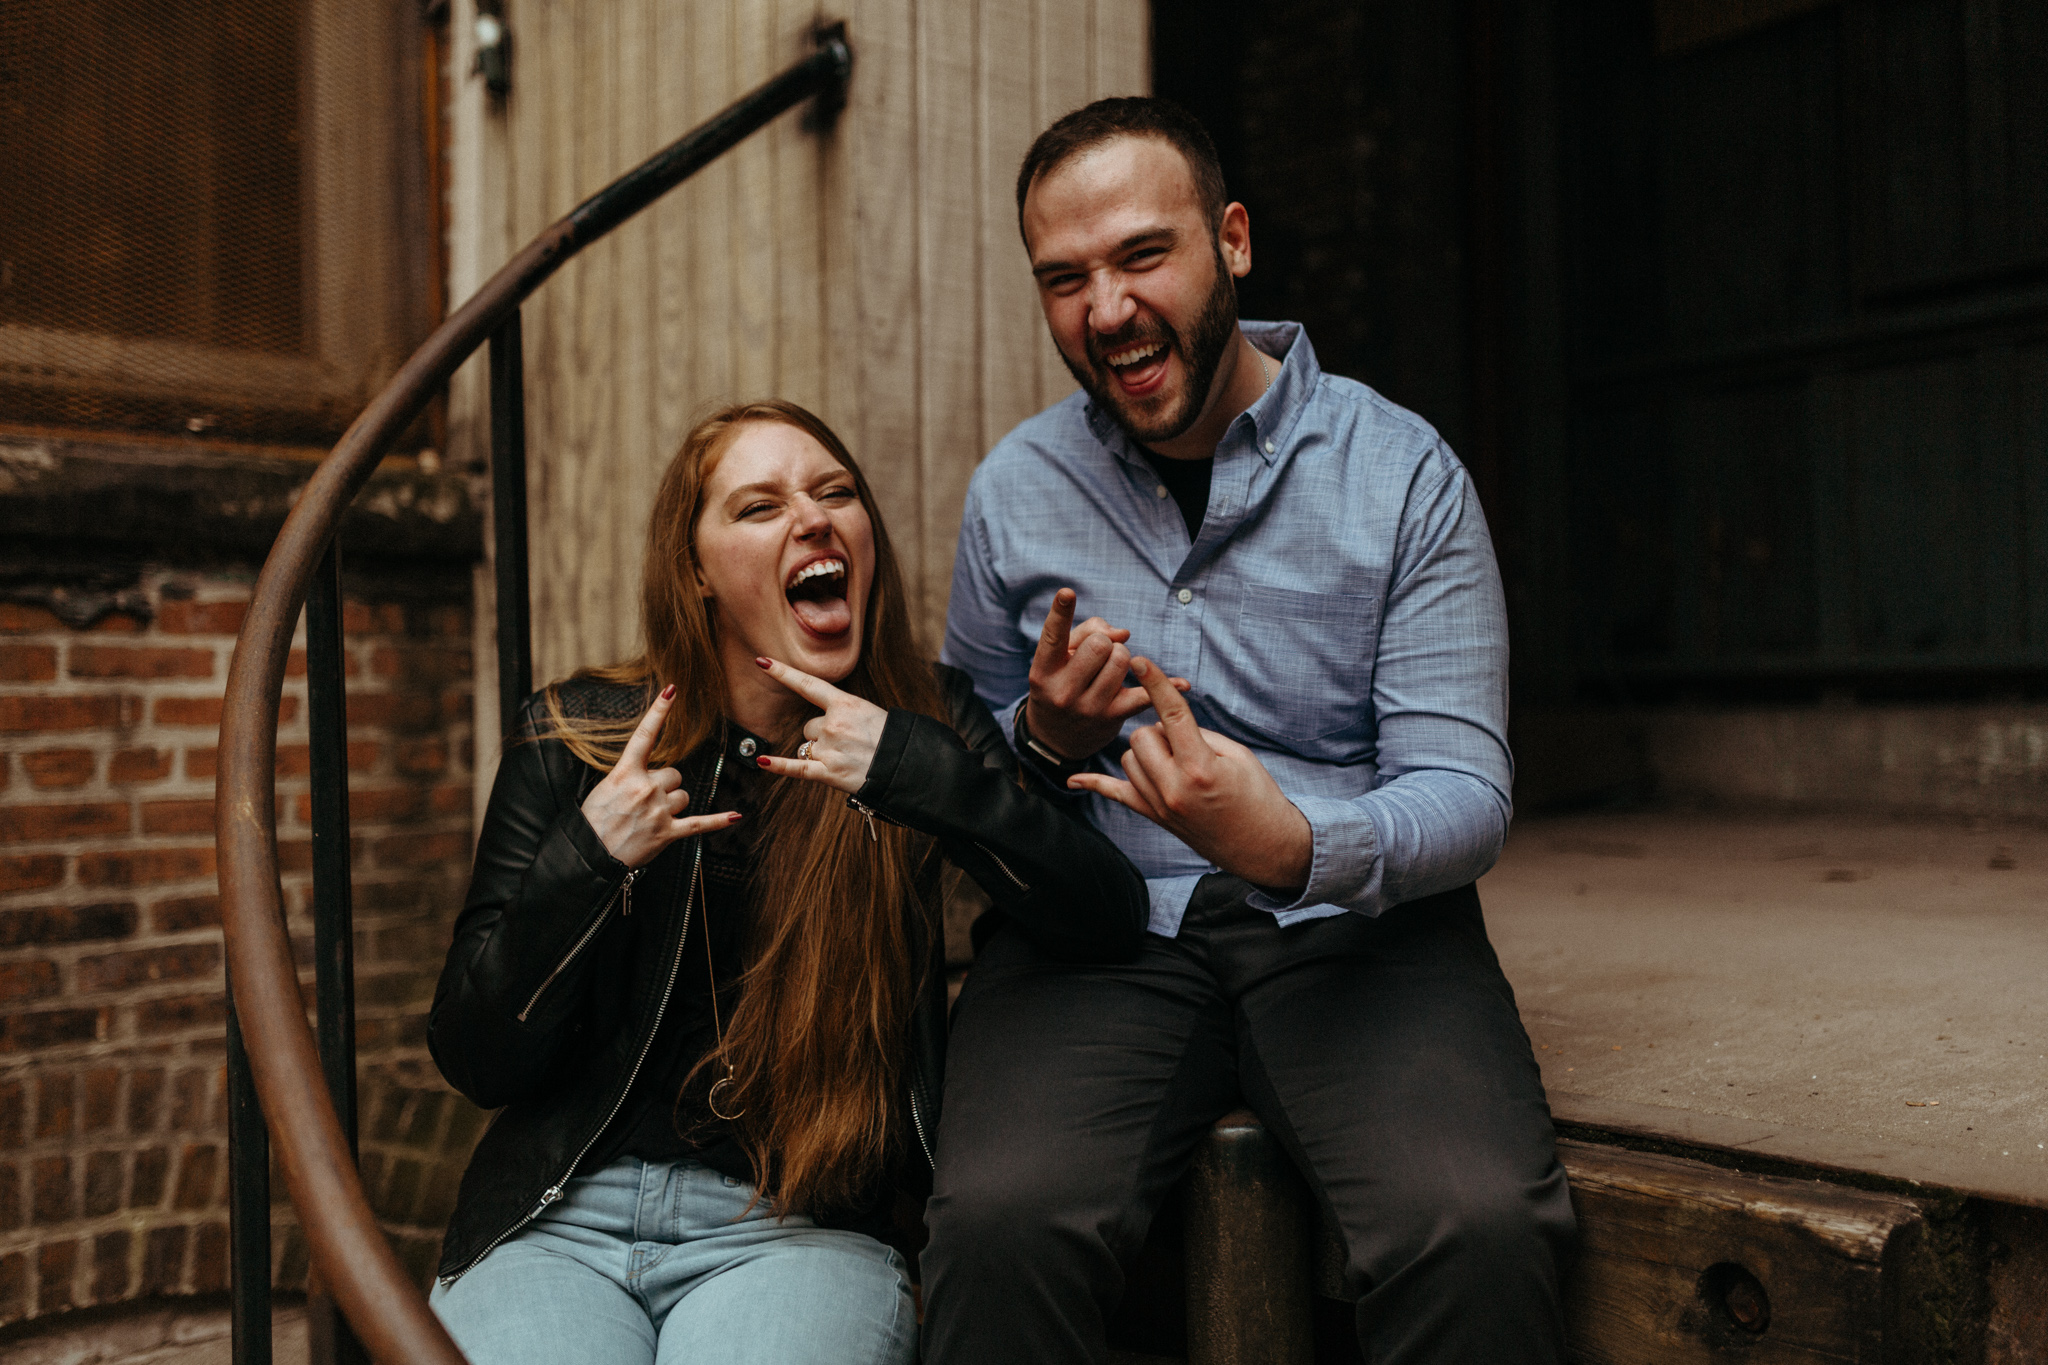 Edgy Industrial Clipper Mill Baltimore Engagement // Victoria Selman Photographer